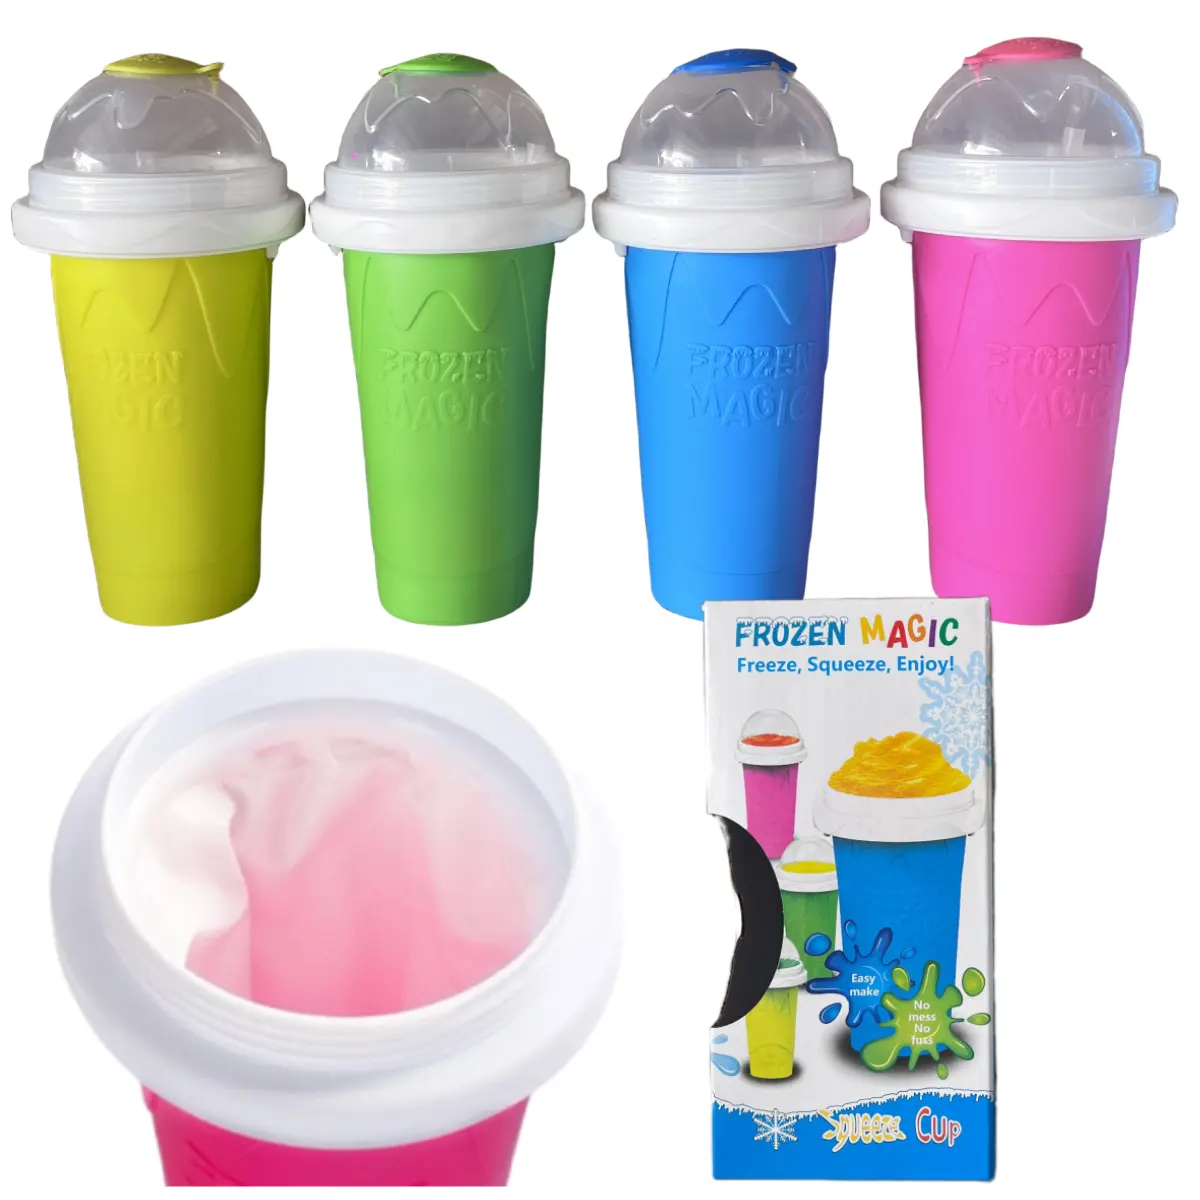 DIY Smoothie Cups Freezes Getränke Double Ice Slushie Cup Cooling Maker Becher Gefrier becher Tools Portable Squeeze Icy Cup